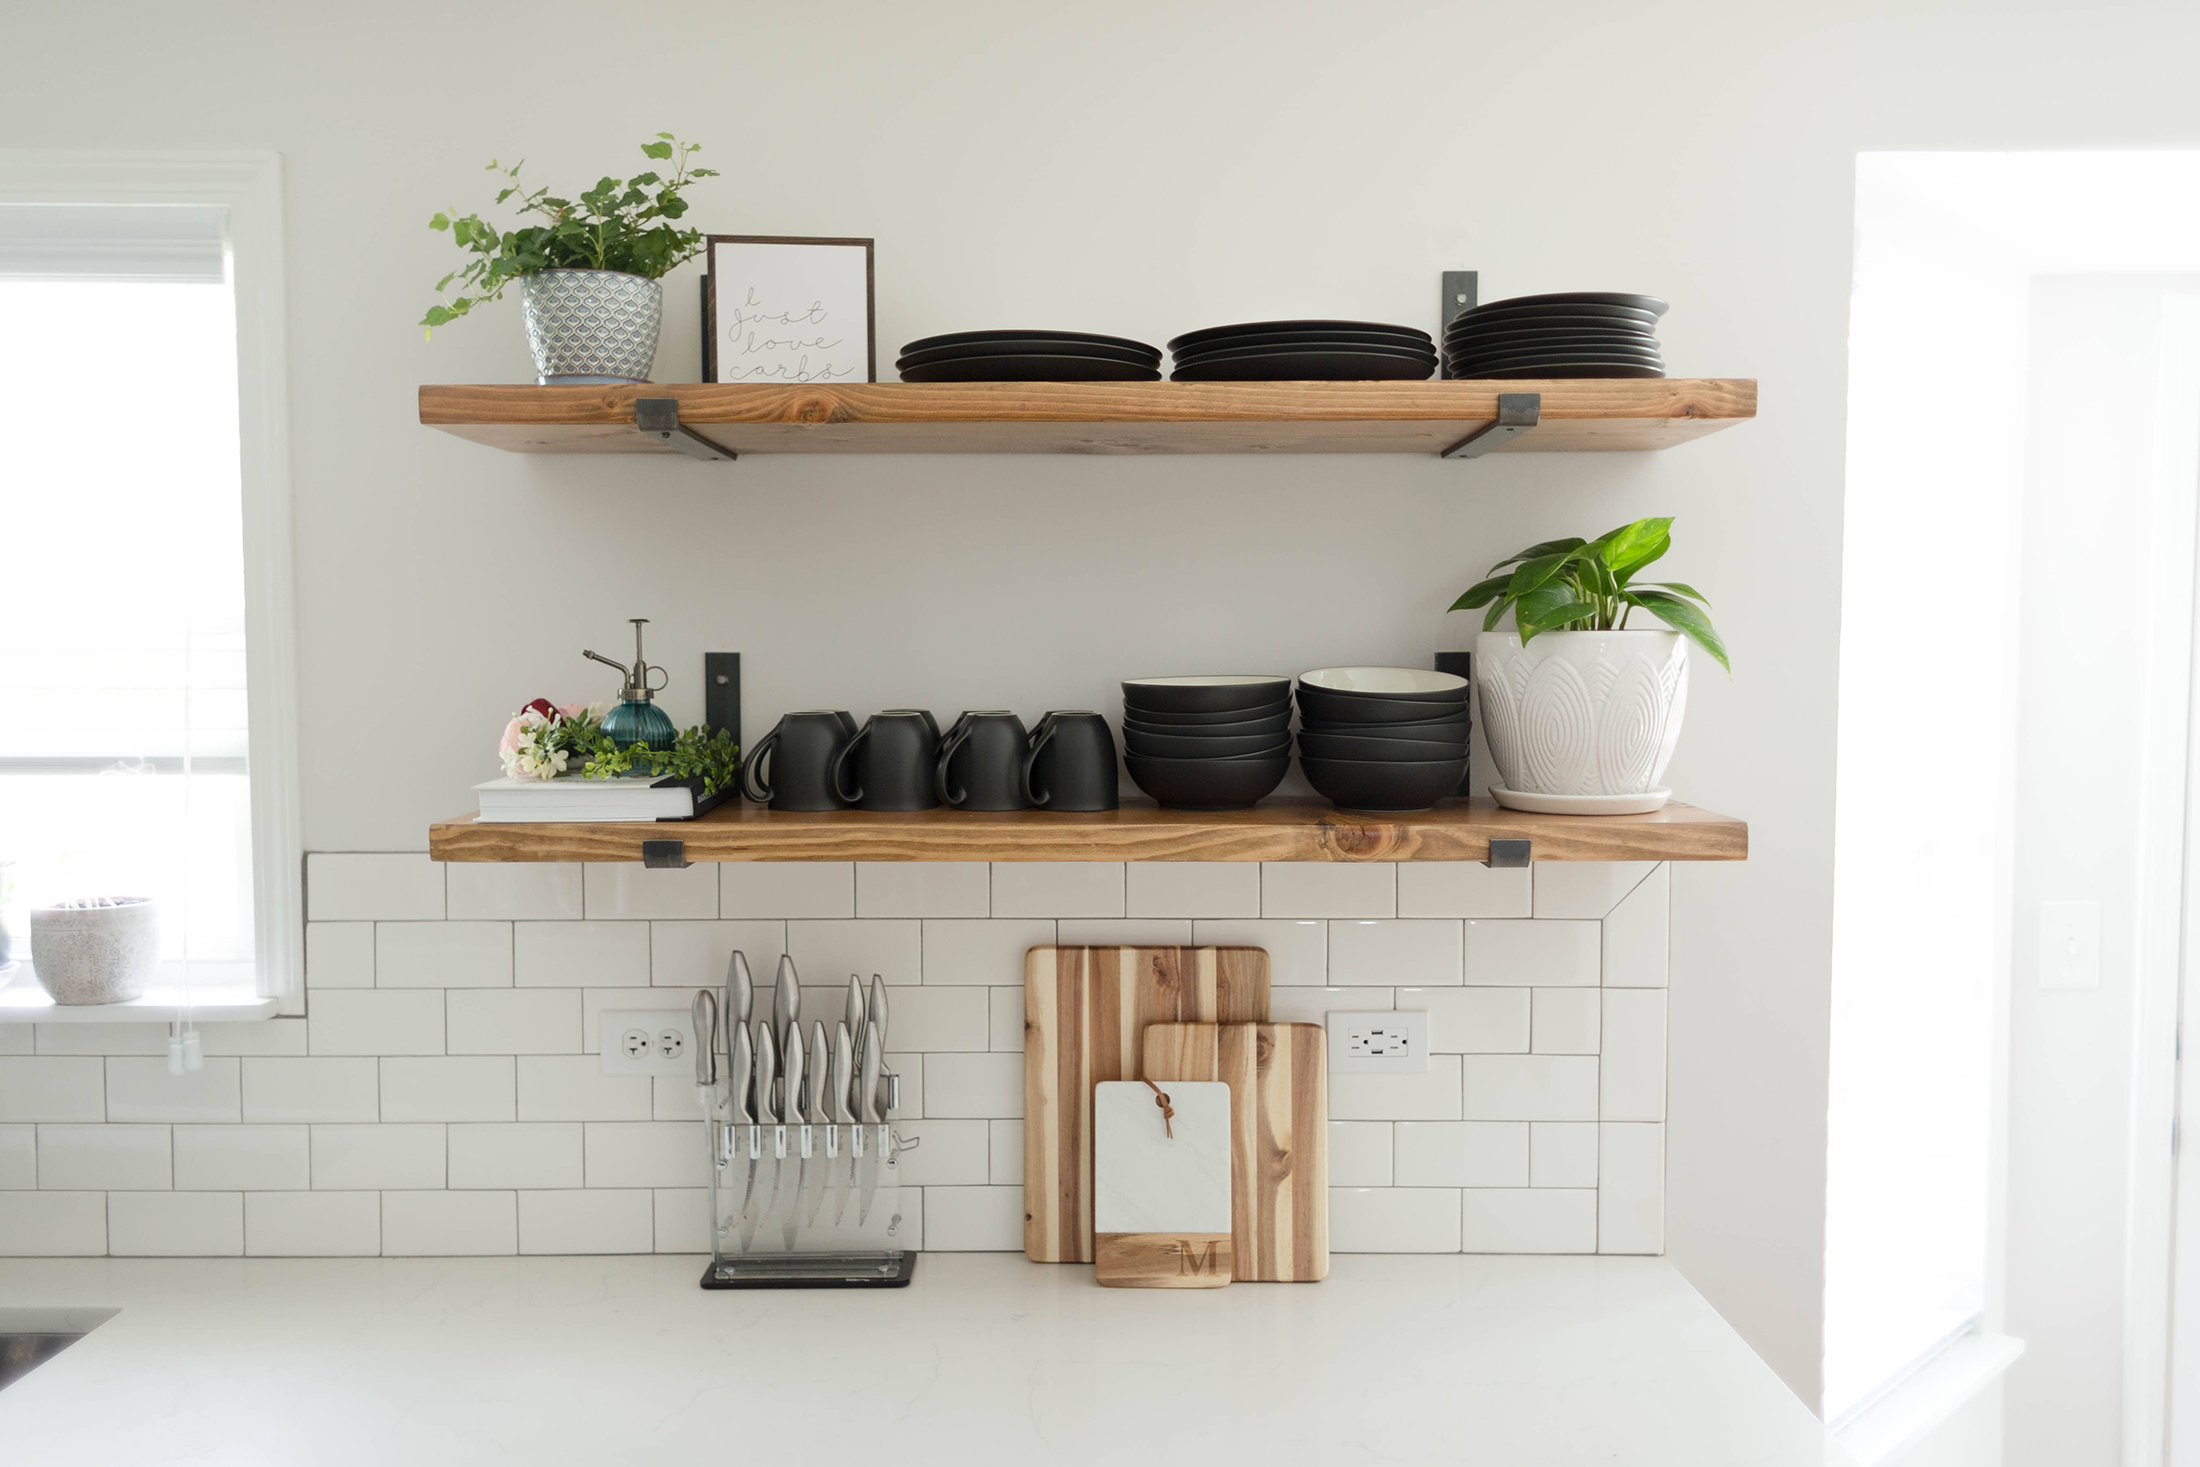 Diy Kitchen Open Shelving Sammy On State, How To Make Open Shelving For Kitchen